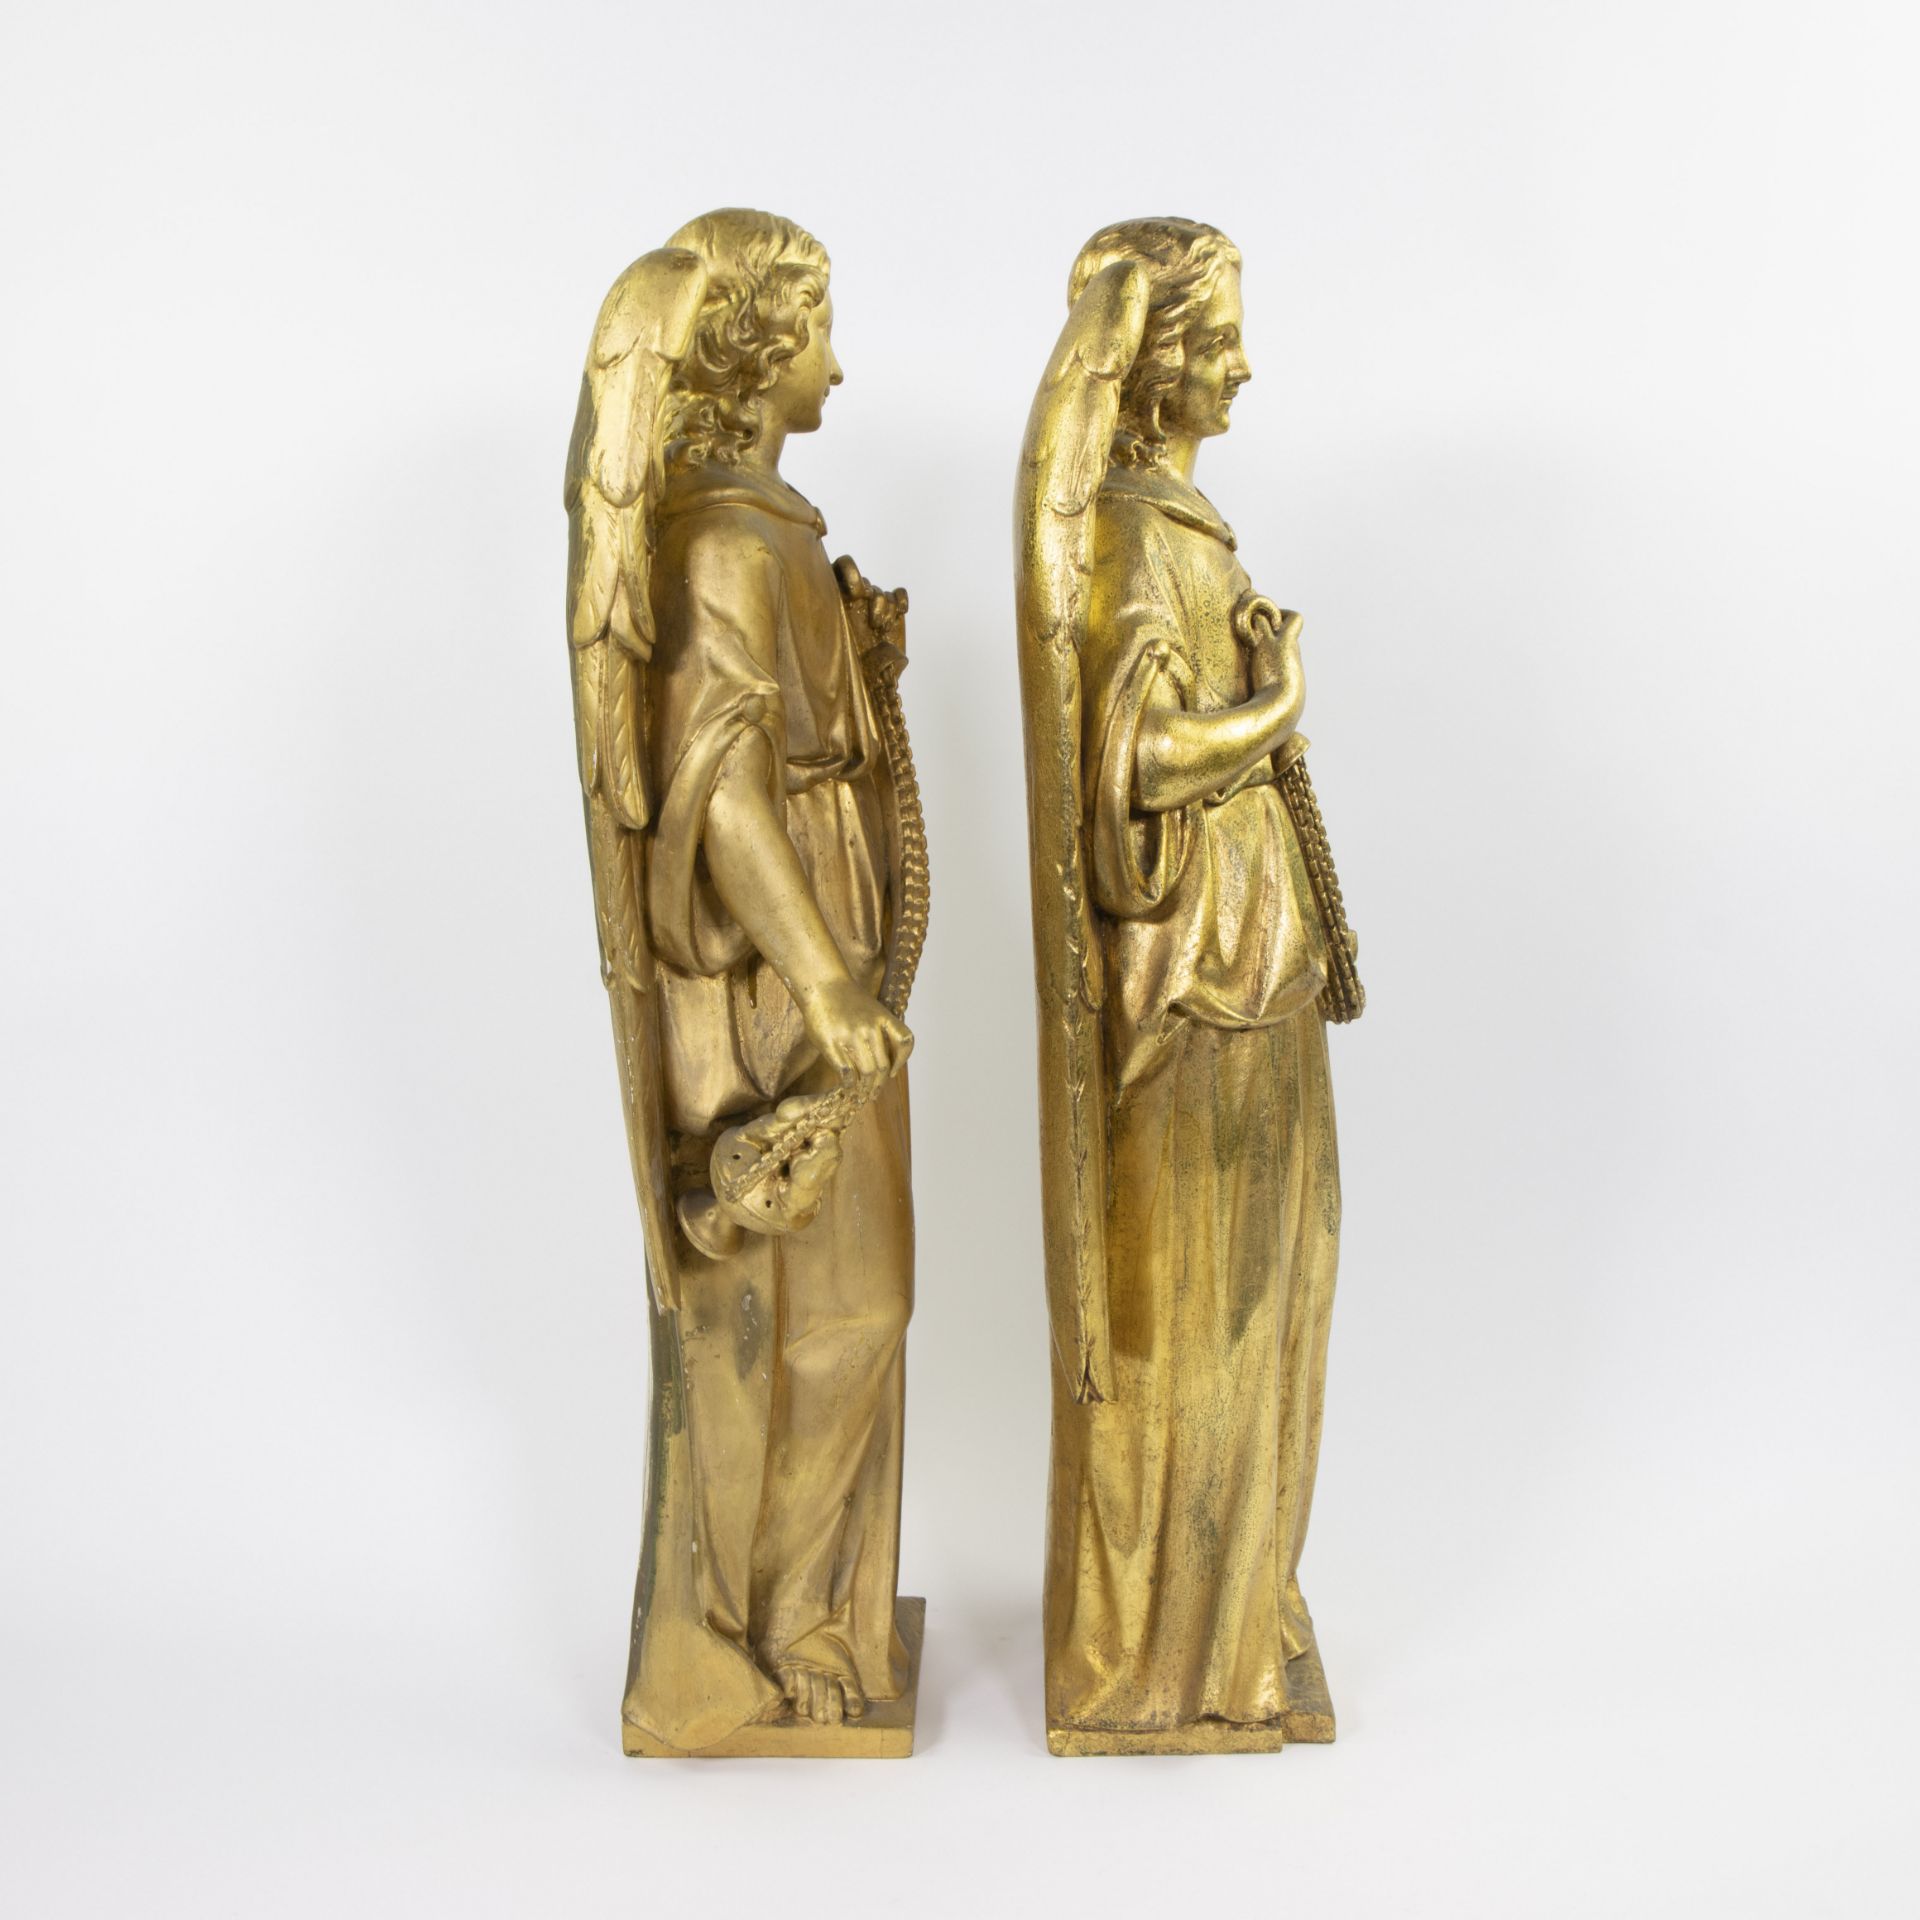 Pair of neo-gothic gilded wooden angels, Flemish, 19th century - Image 4 of 4